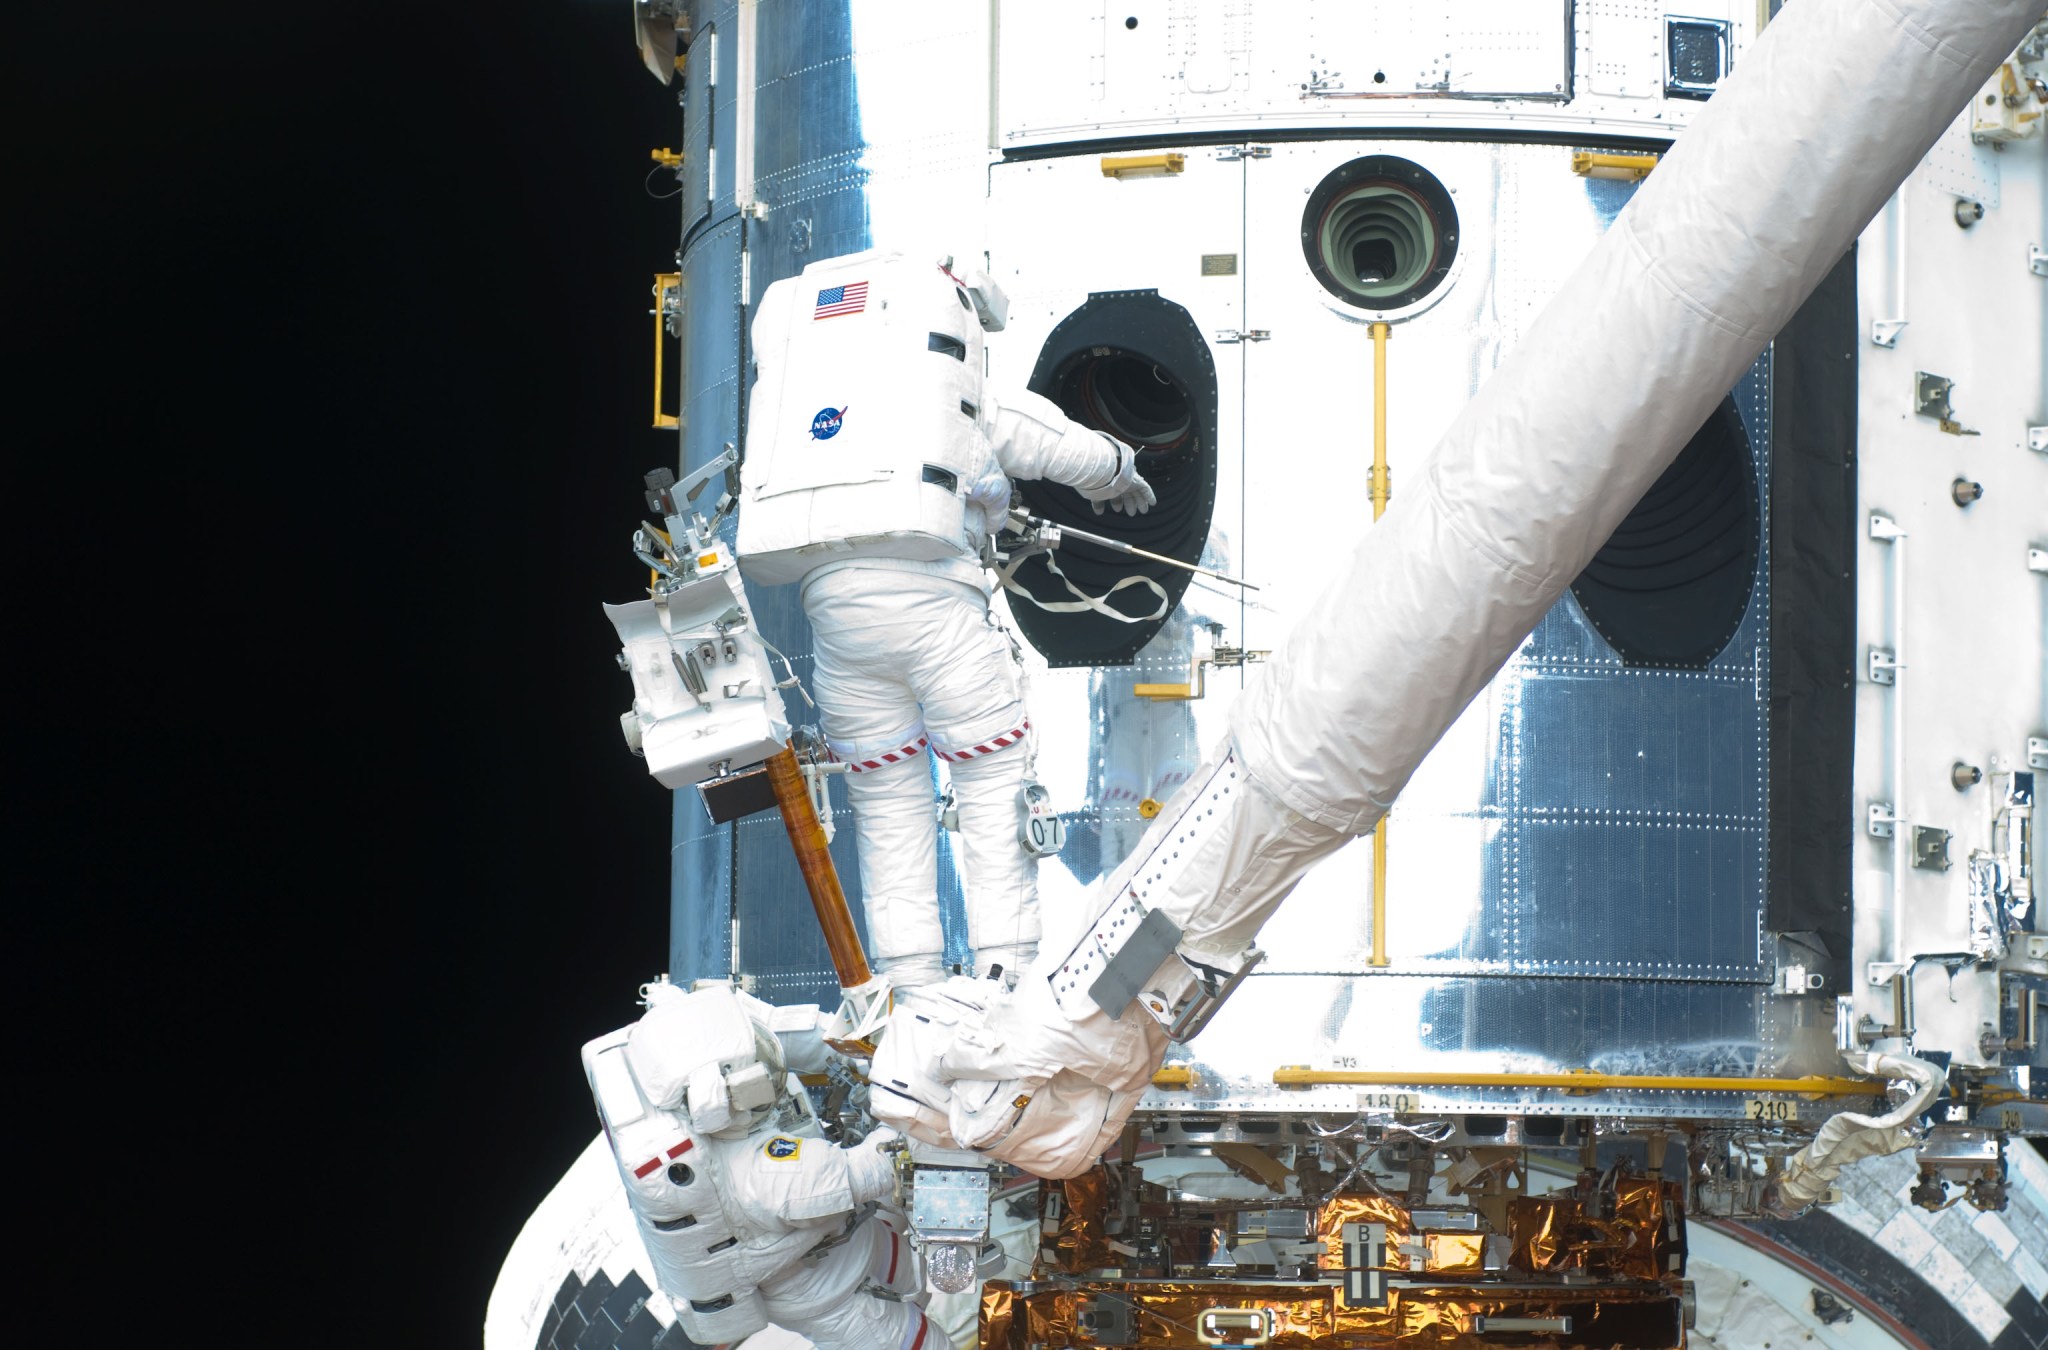 Two astronauts, Mike Massimino assists Michael Good who is standing on the Manipulator Foot Restraint, which is connected to the Shuttle Remote Manipulator System/Canadarm